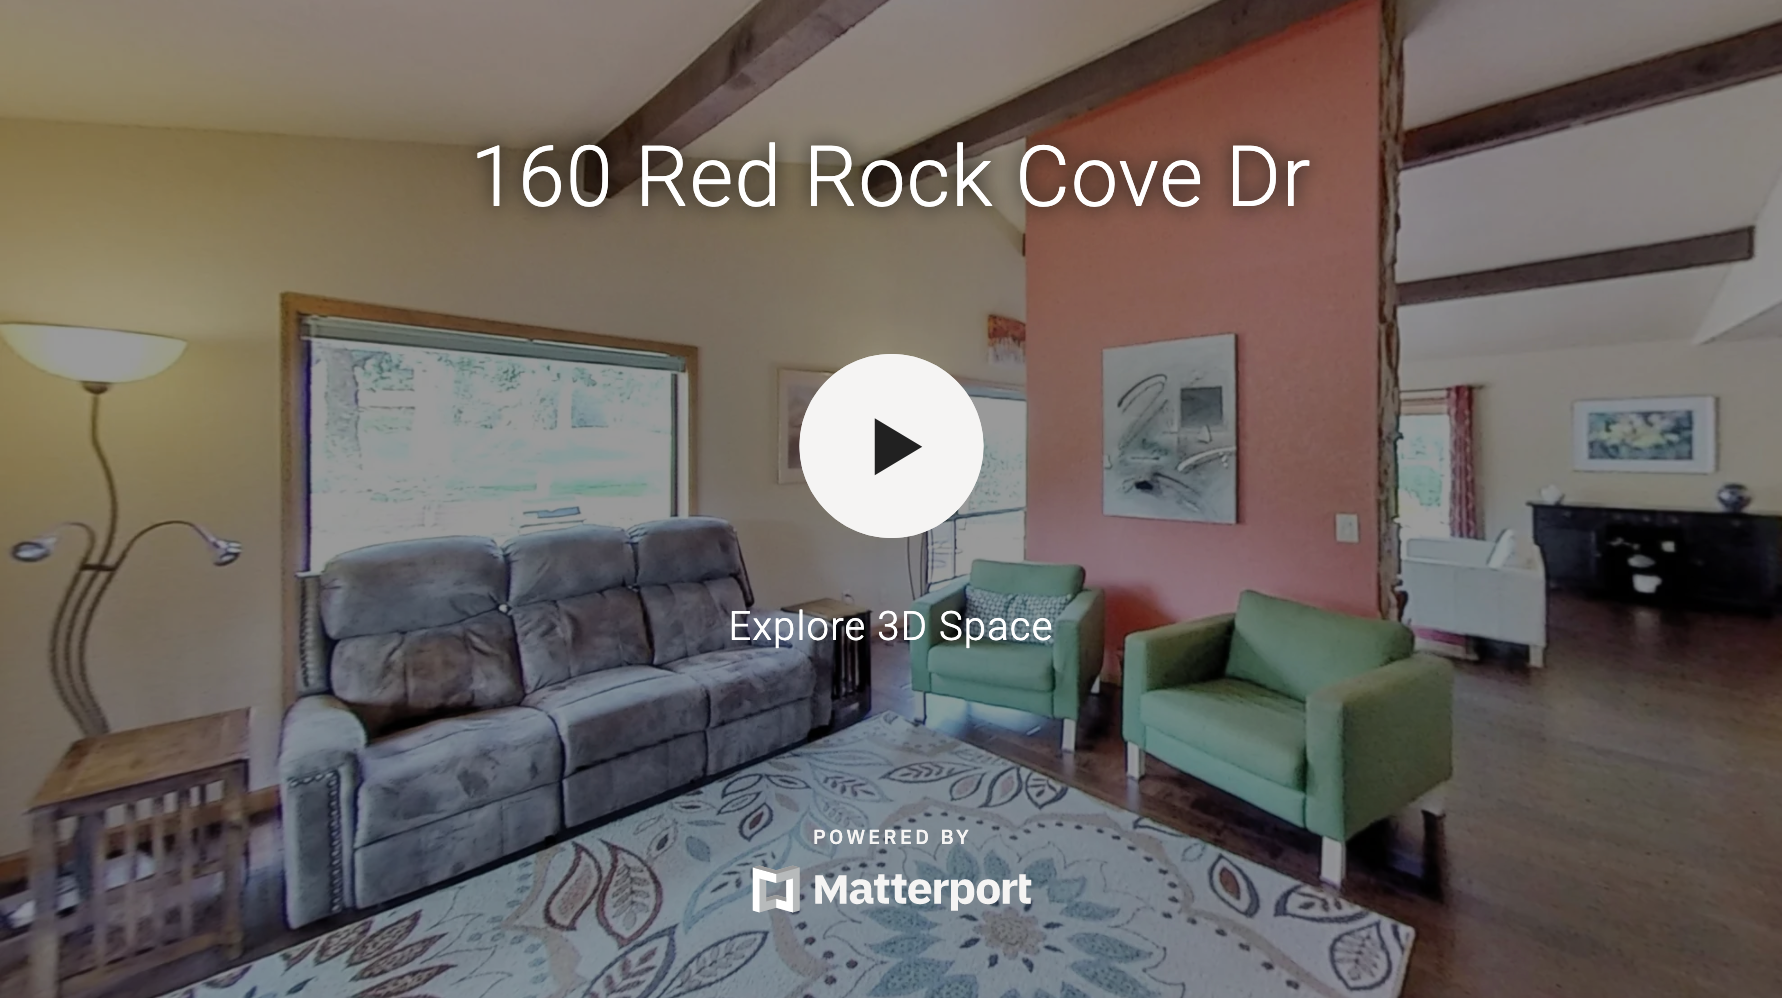 160 Red Rock Cove